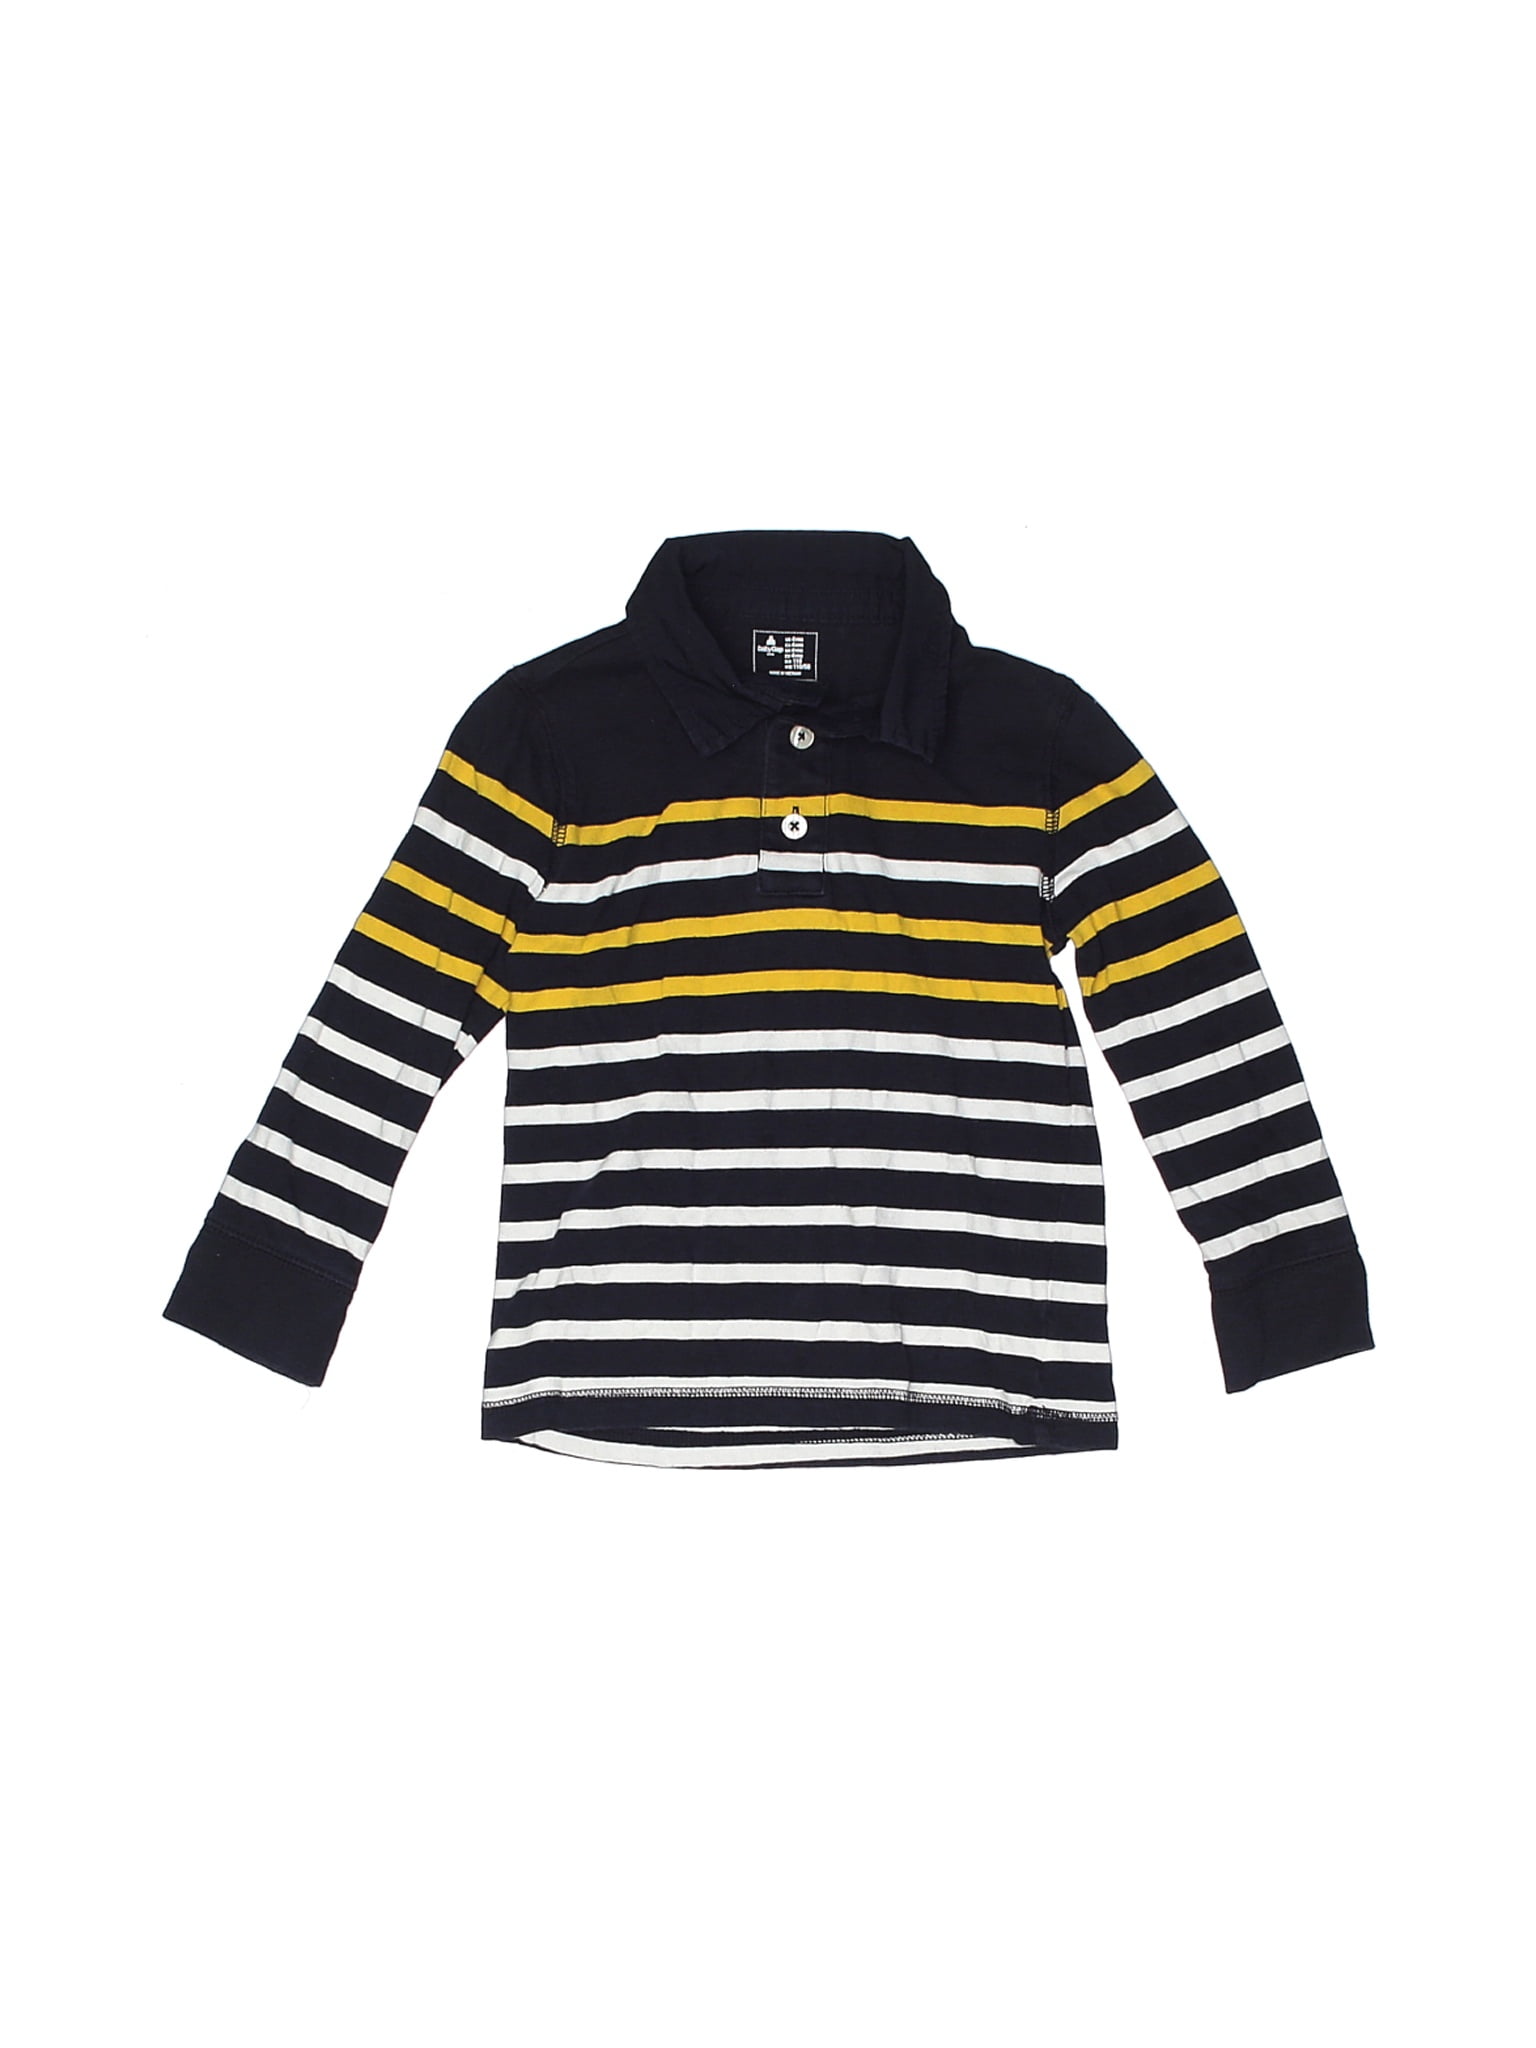 baby polo outlet